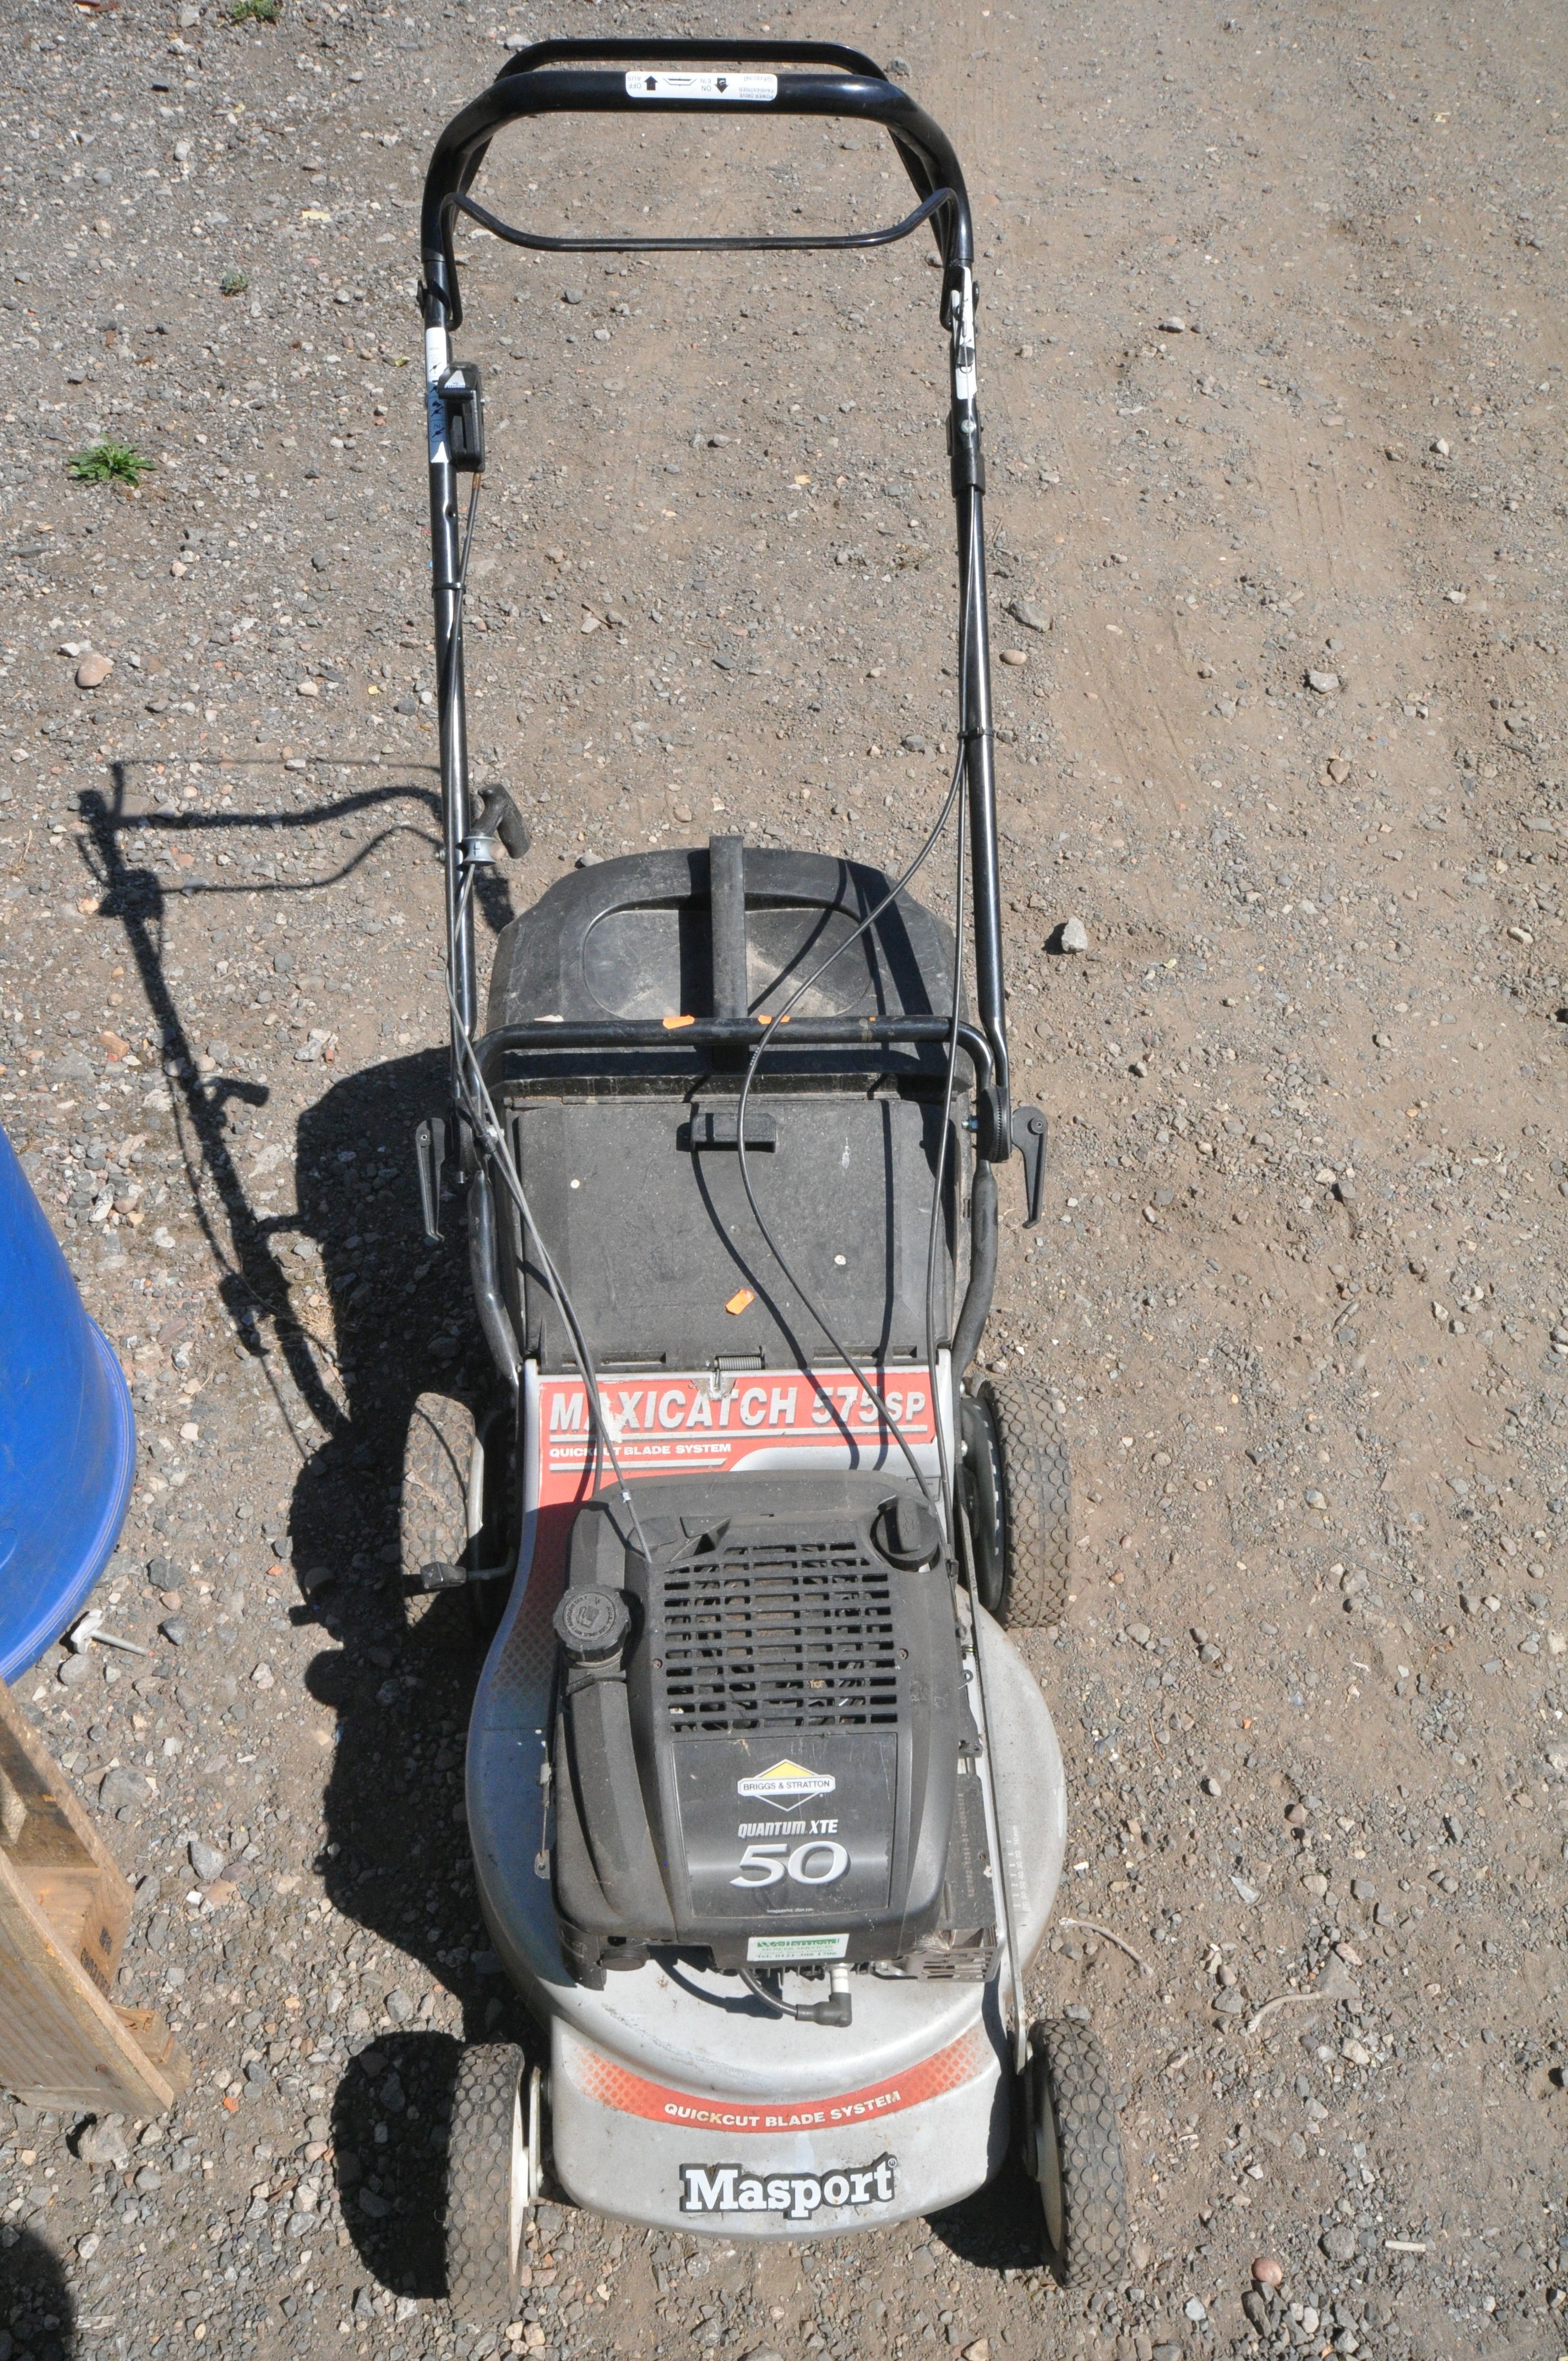 A MASPORT MAXICATCH 575SP SELF PROPELLED PETROL LAWNMOWER, with a grassbox (engine turns) - Image 2 of 2